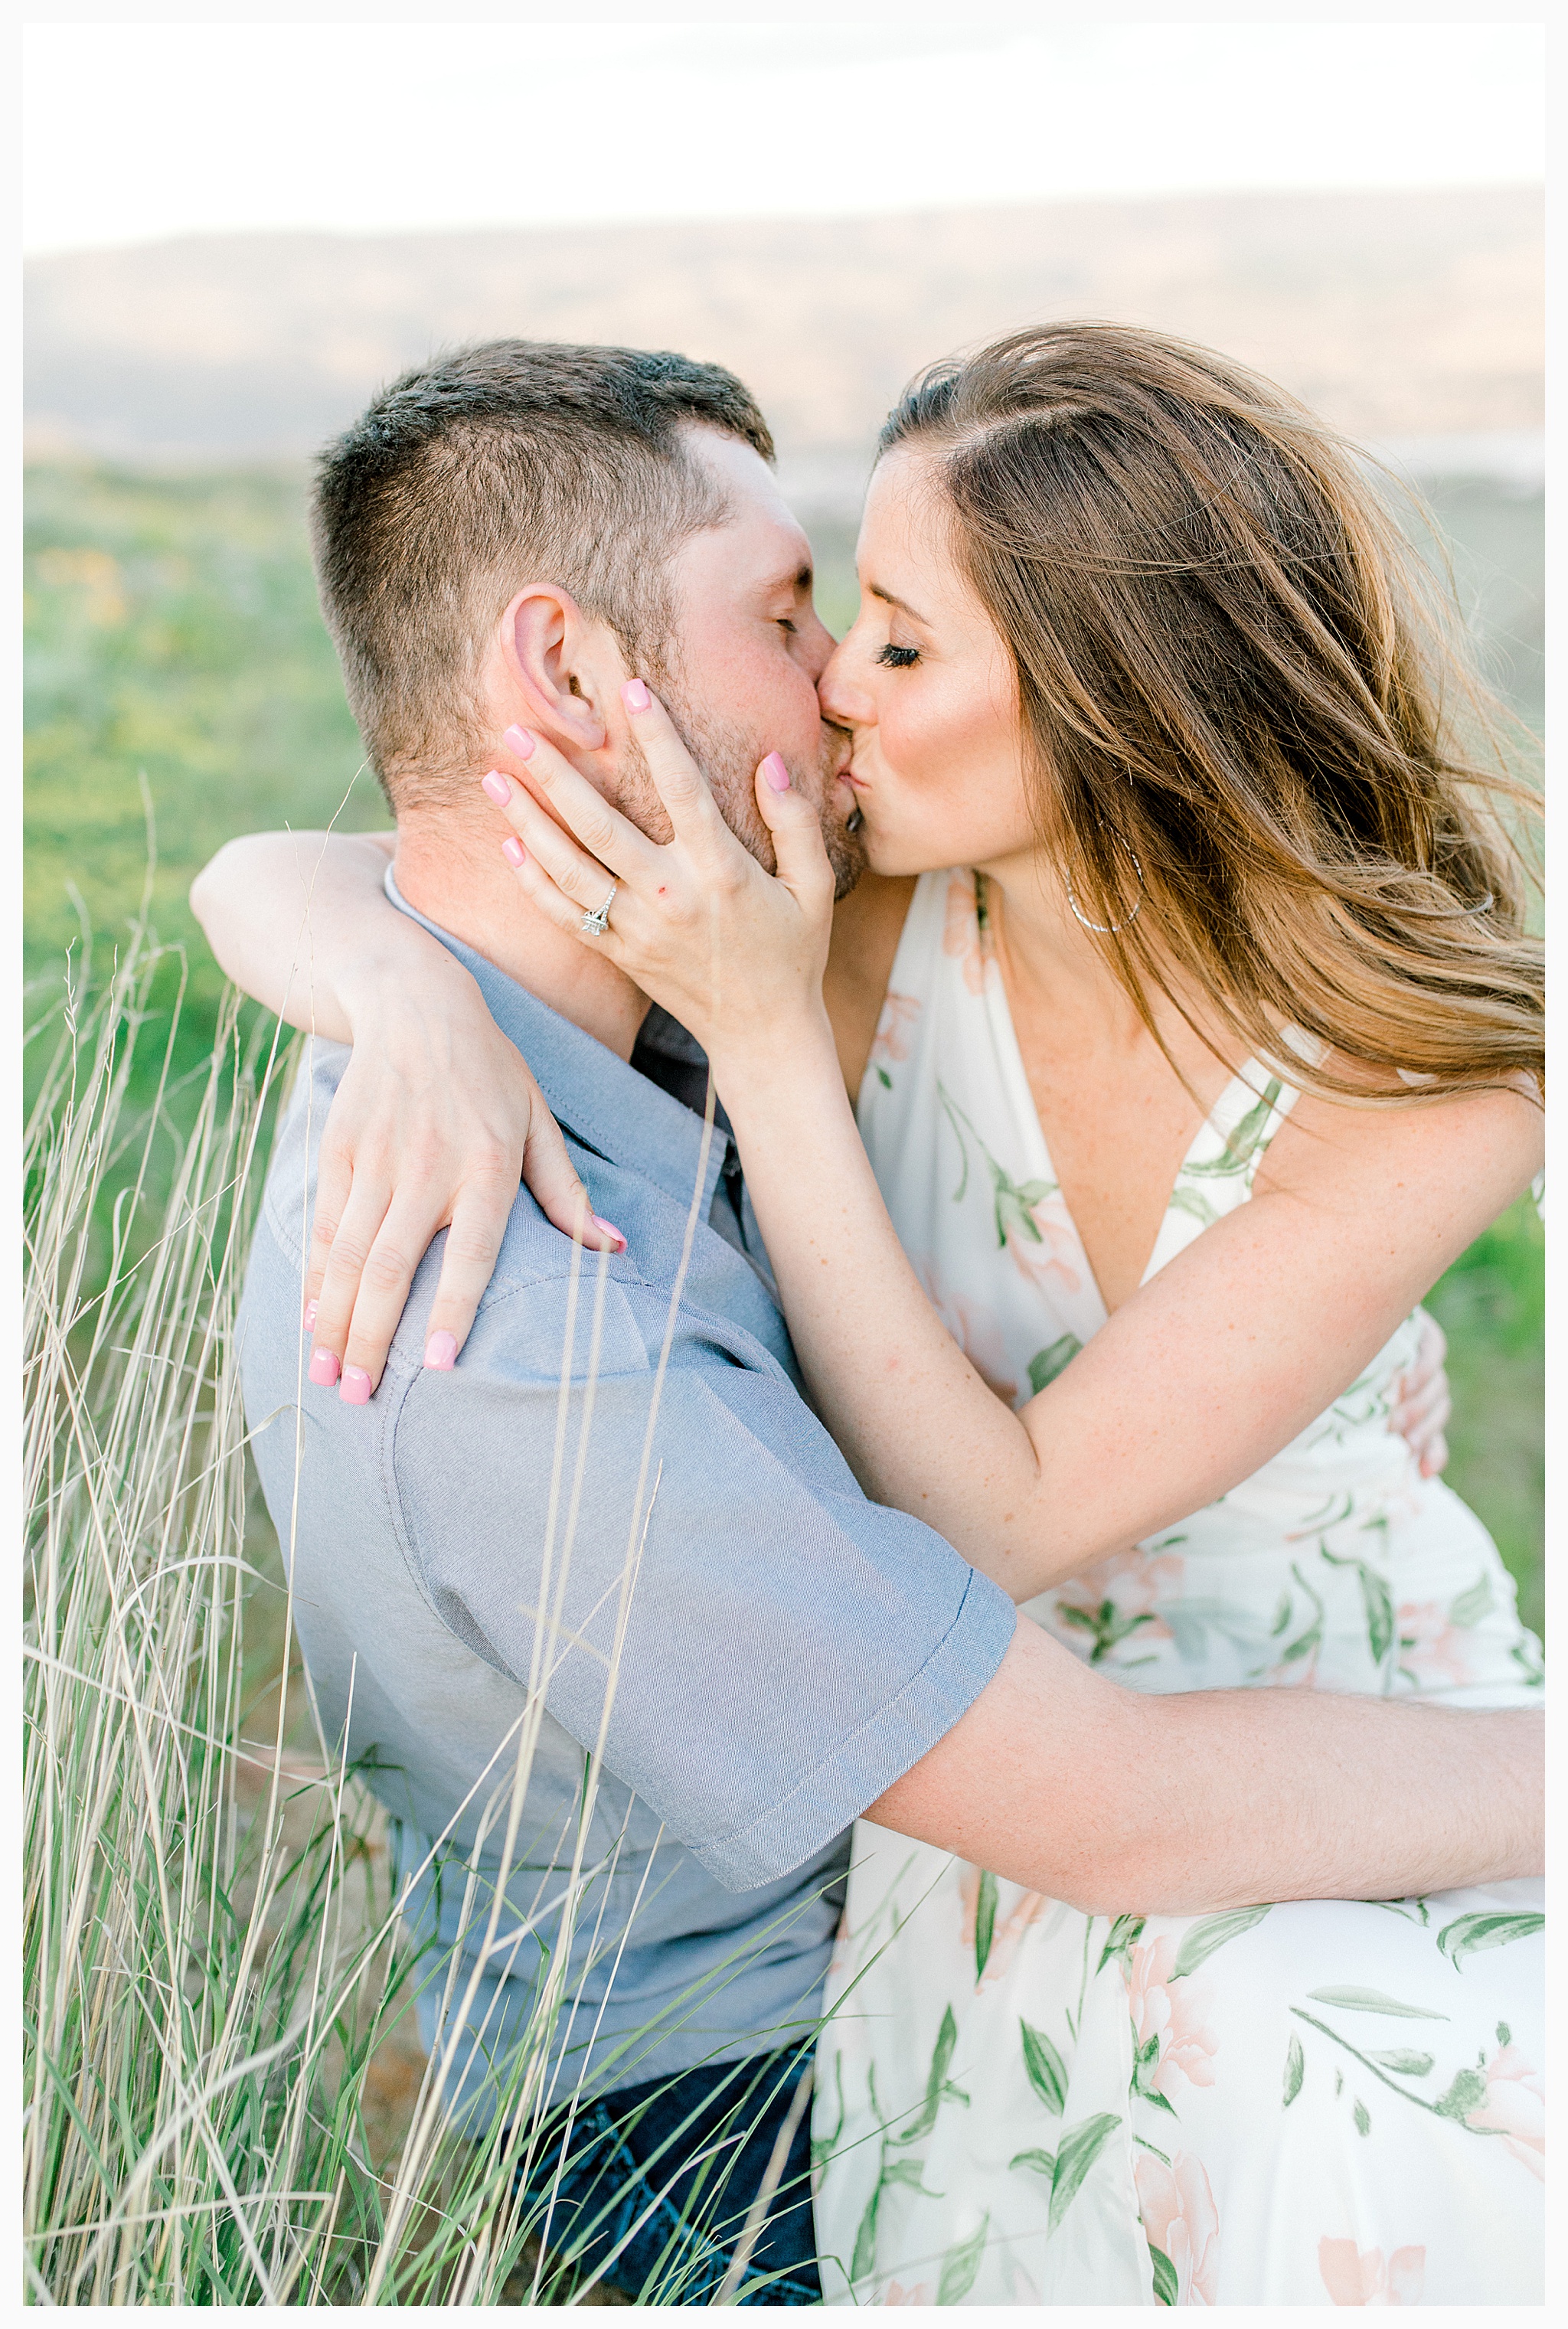 Engagement session amongst the wildflowers in Wenatchee, Washington | Engagement Session Outfit Inspiration for Wedding Photography with Emma Rose Company | Light and Airy PNW Photographer, Seattle Bride_0022.jpg